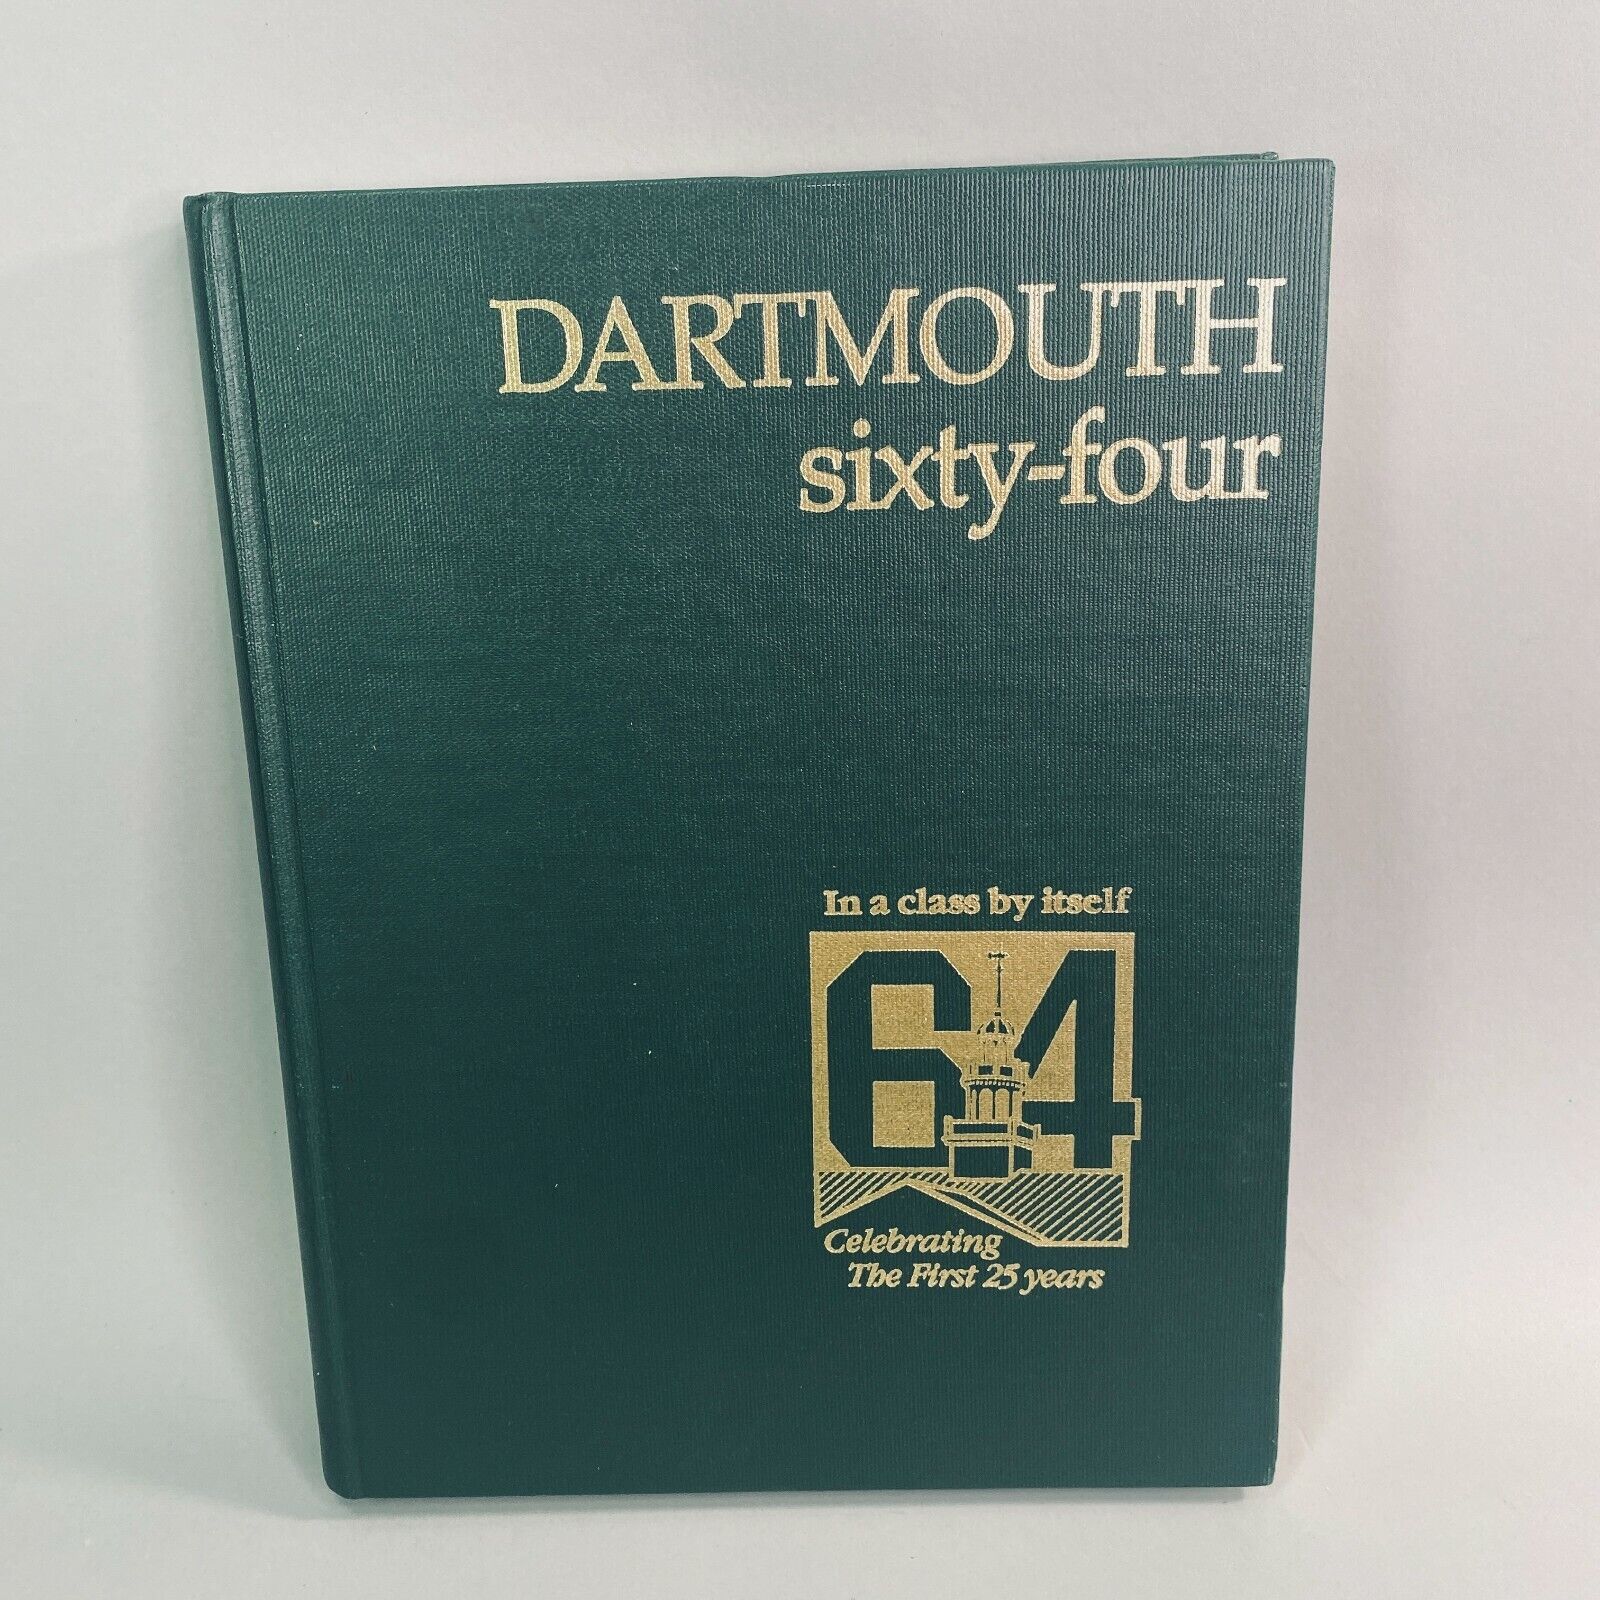 Vintage Class of '64 Dartmouth 25th Reunion Yearbook Limited Edition of 1000